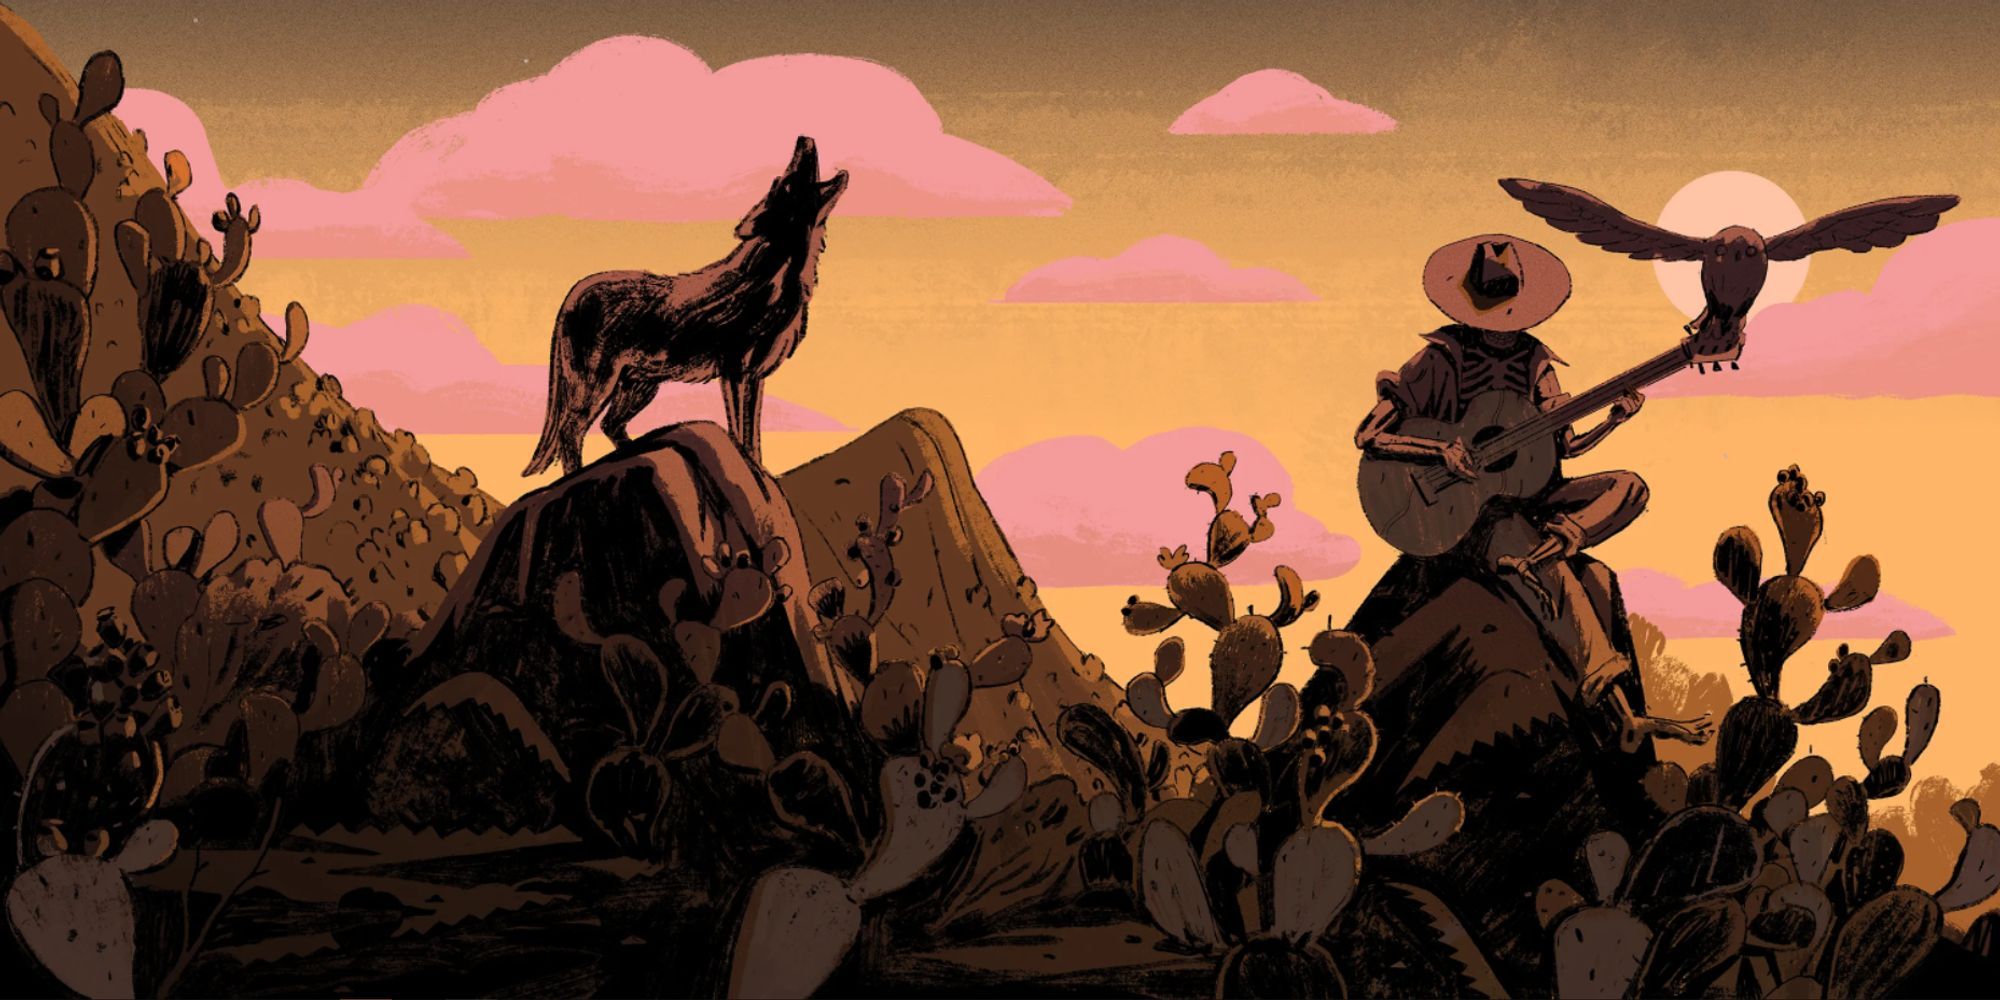 Drawn cowboy playing guitar in desert with wolf and eagle at sunset